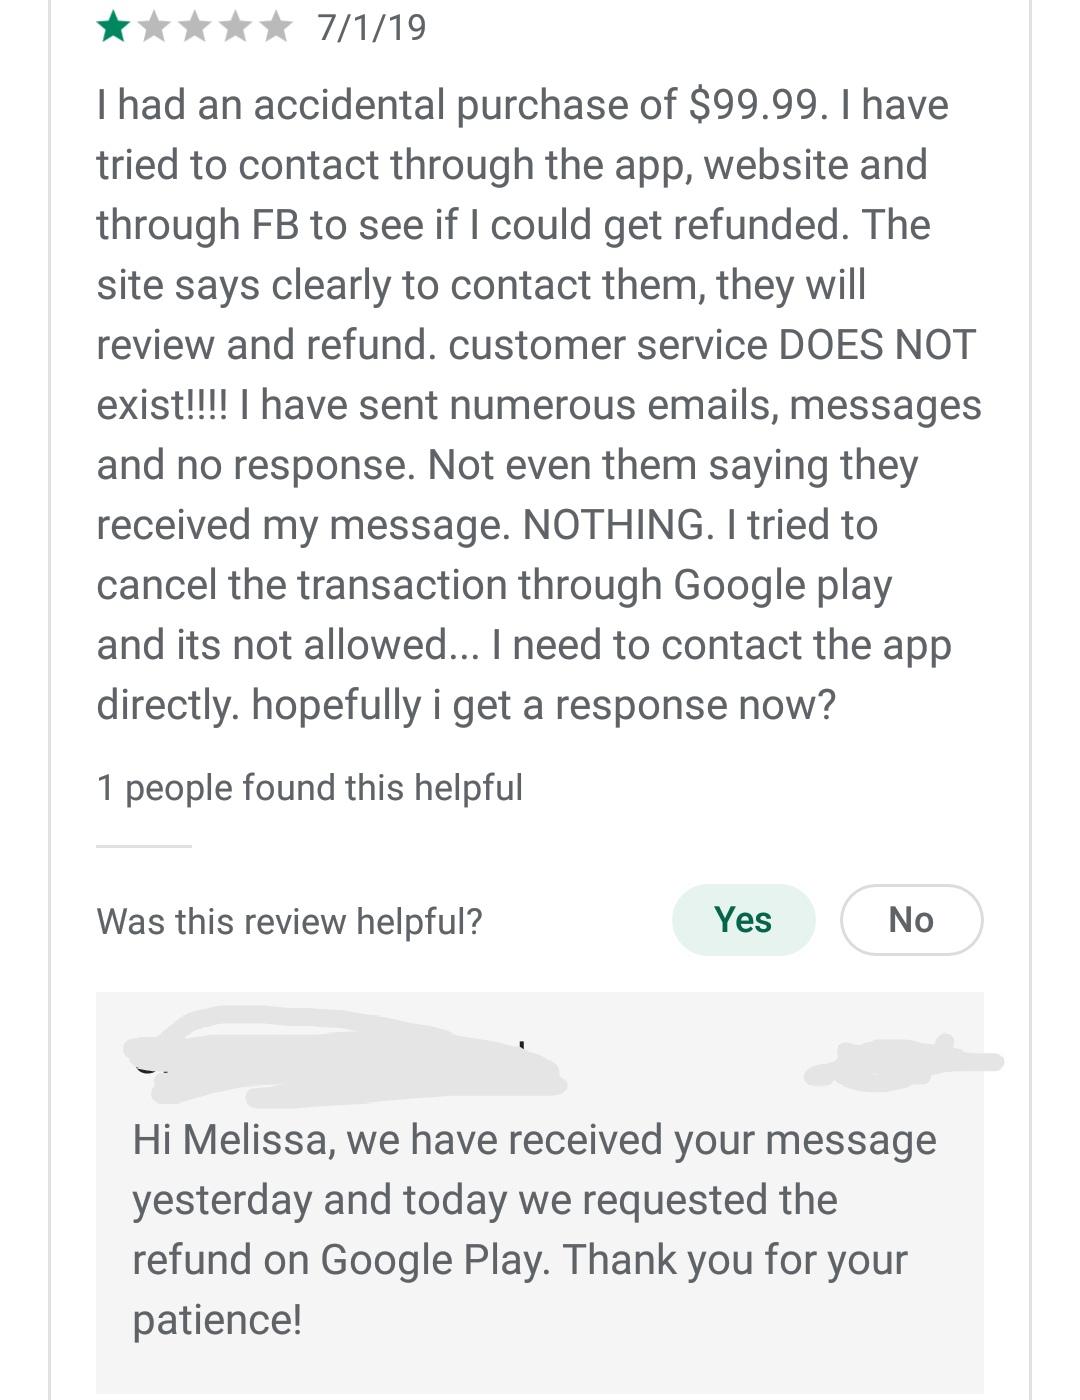 quit your bullshit - I had an accidental purchase of $99.99. I have tried to contact through the app, website and through Fb to see if I could get refunded. The site says clearly to contact them, they will review and refund. customer service Does Not exis